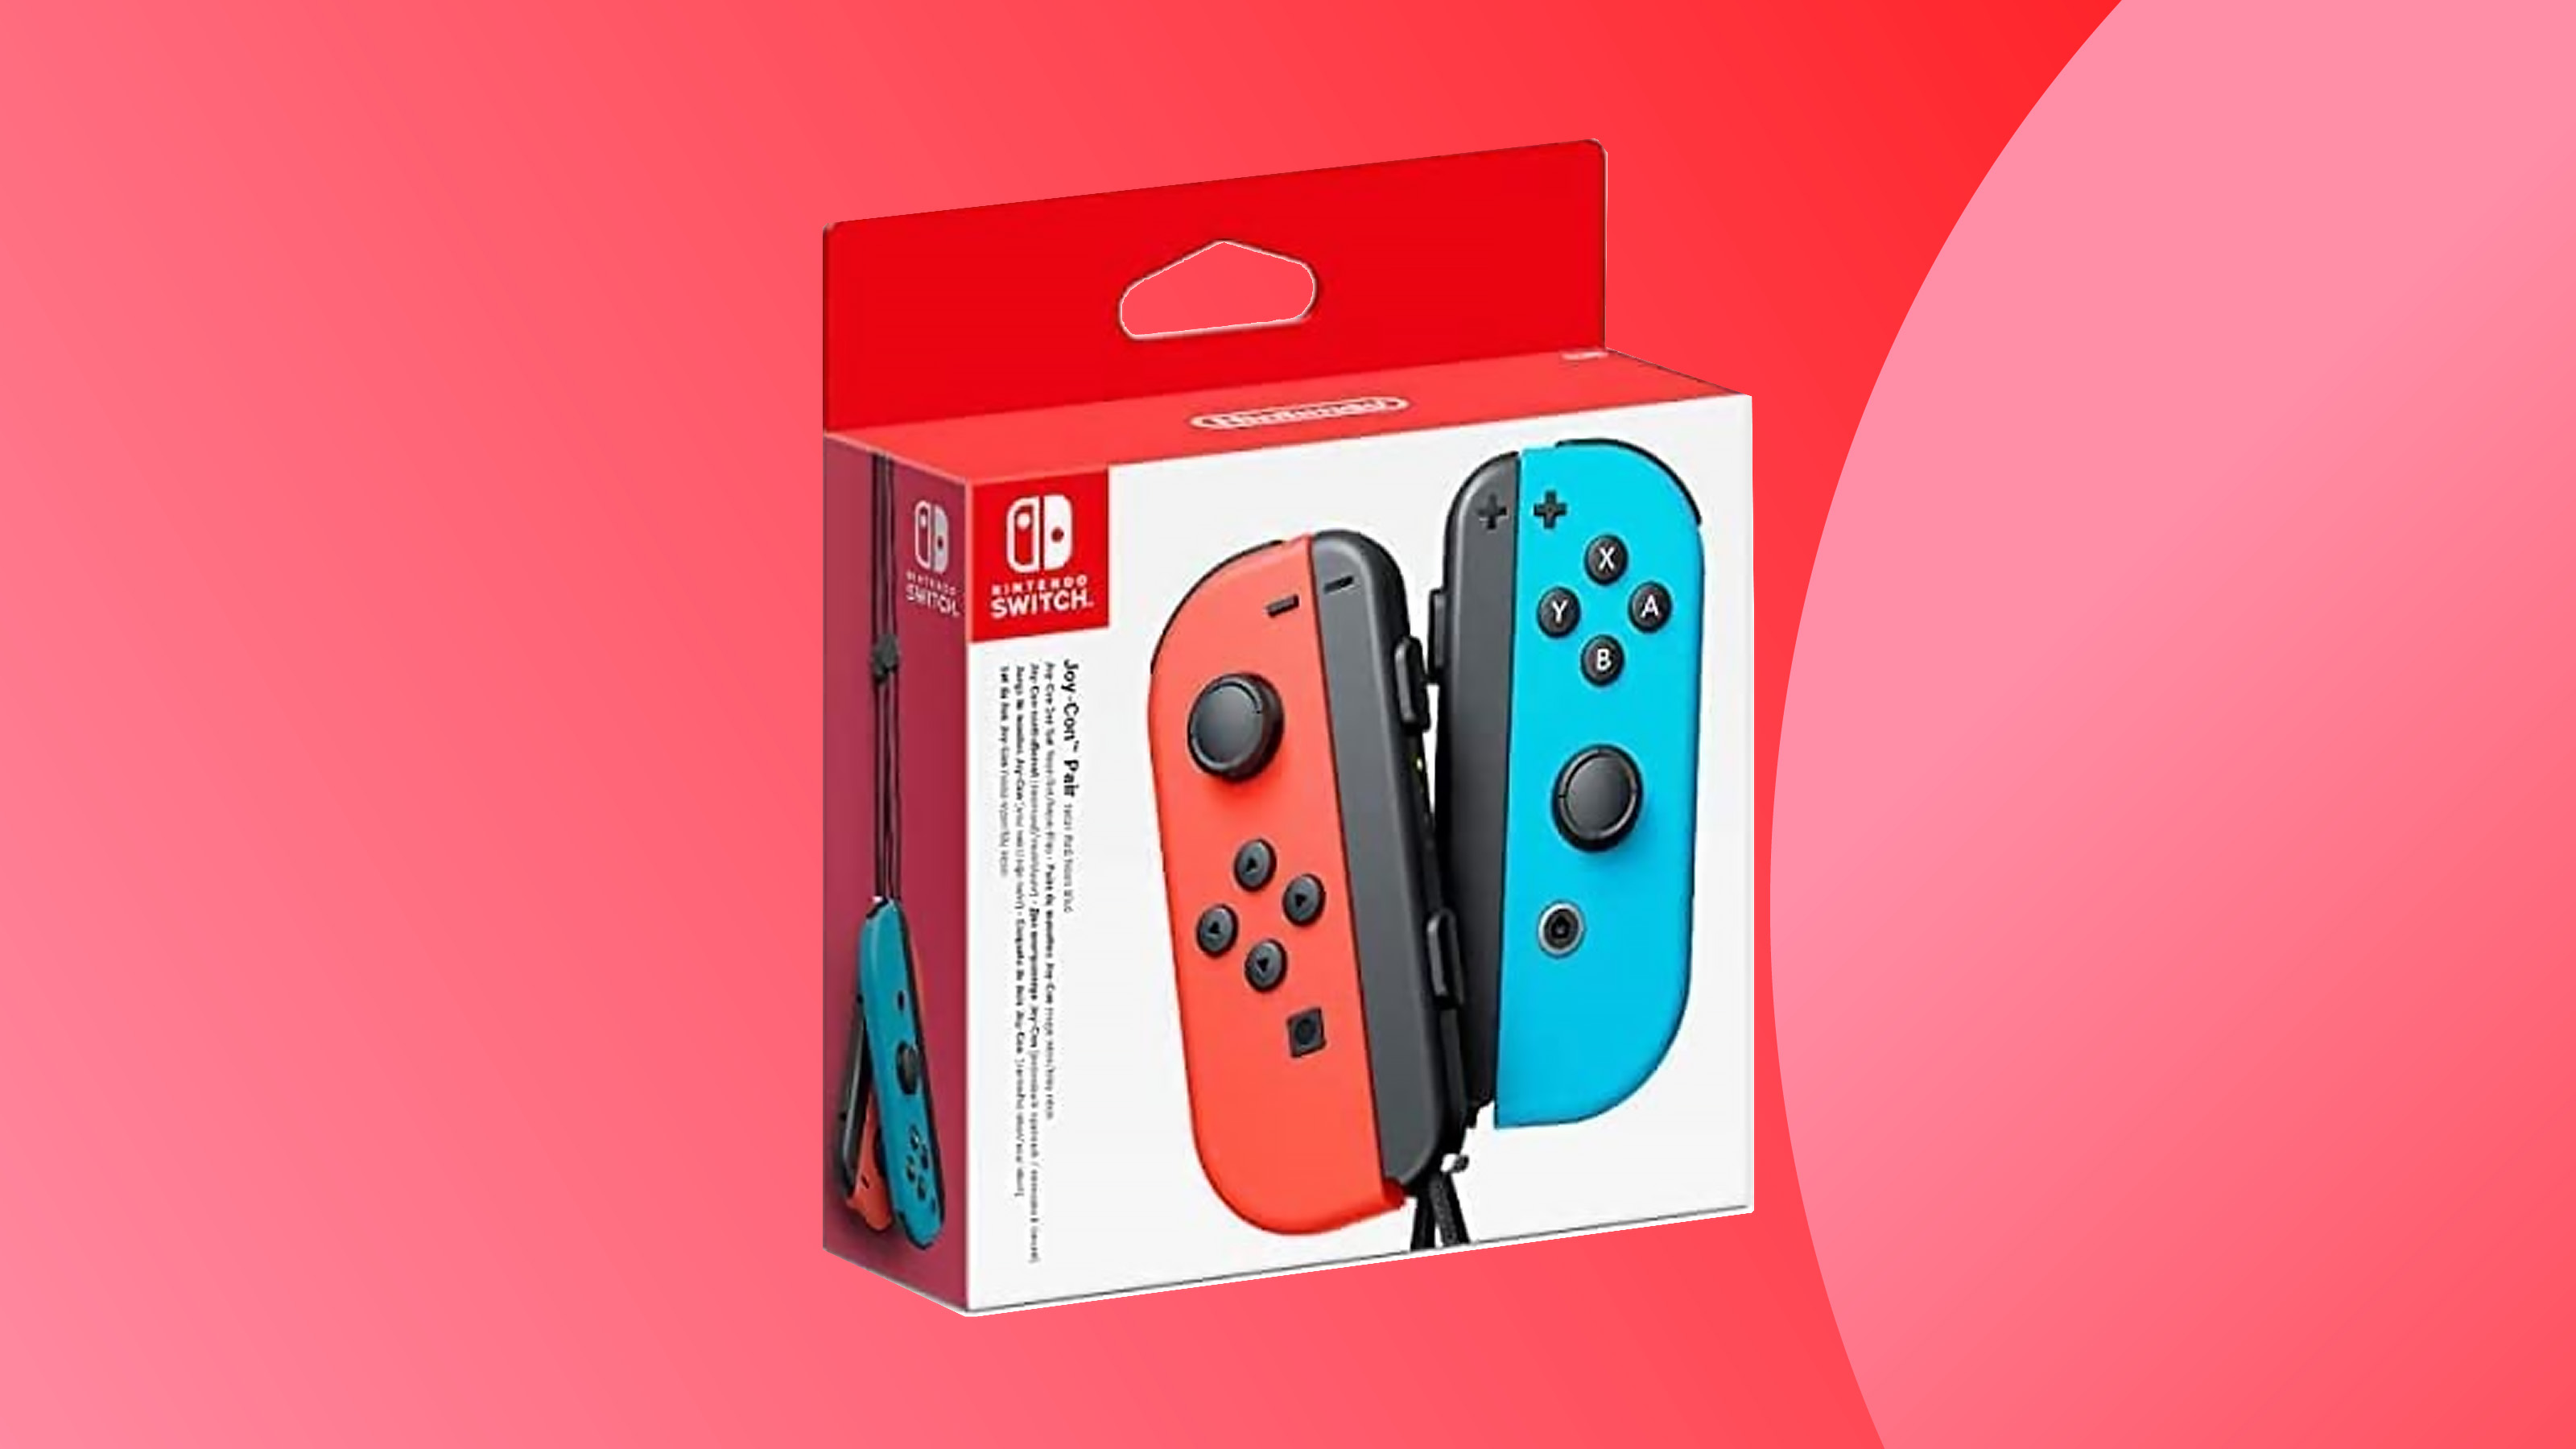 Product shot of the neon Joy-Con pair on a colourful background